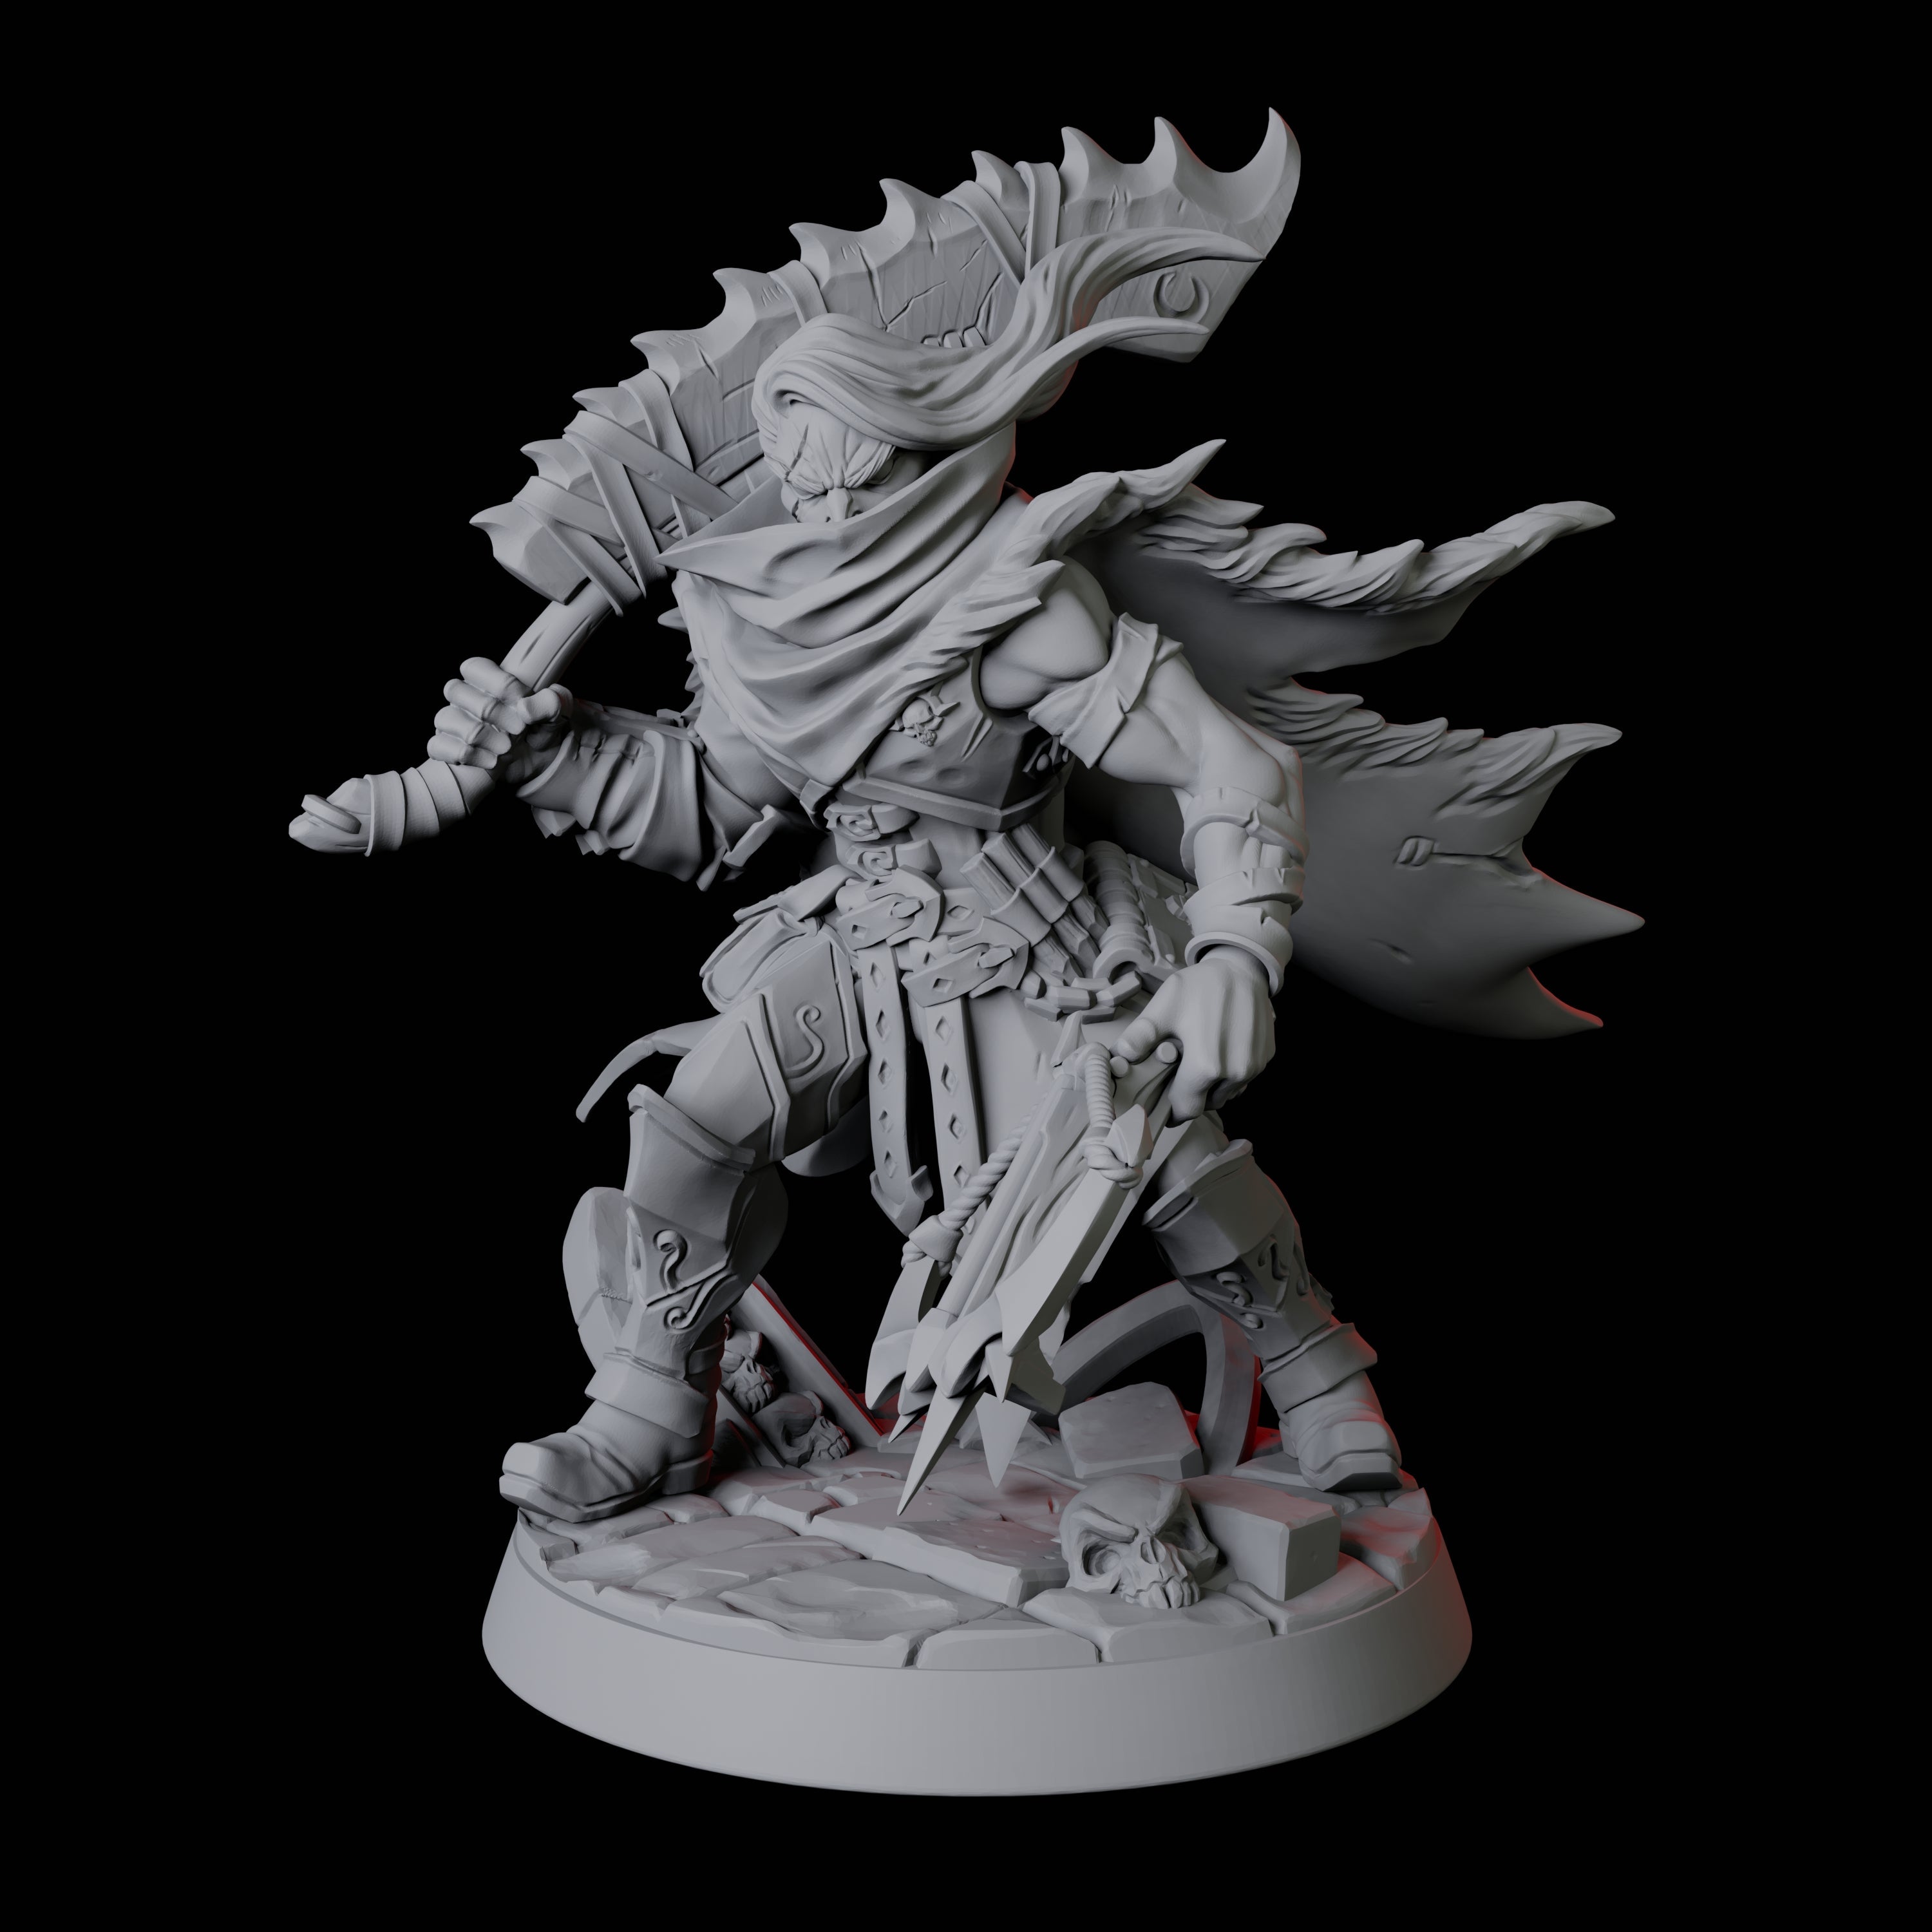 Vampire Hunter Leader Miniature for Dungeons and Dragons, Pathfinder or other TTRPGs